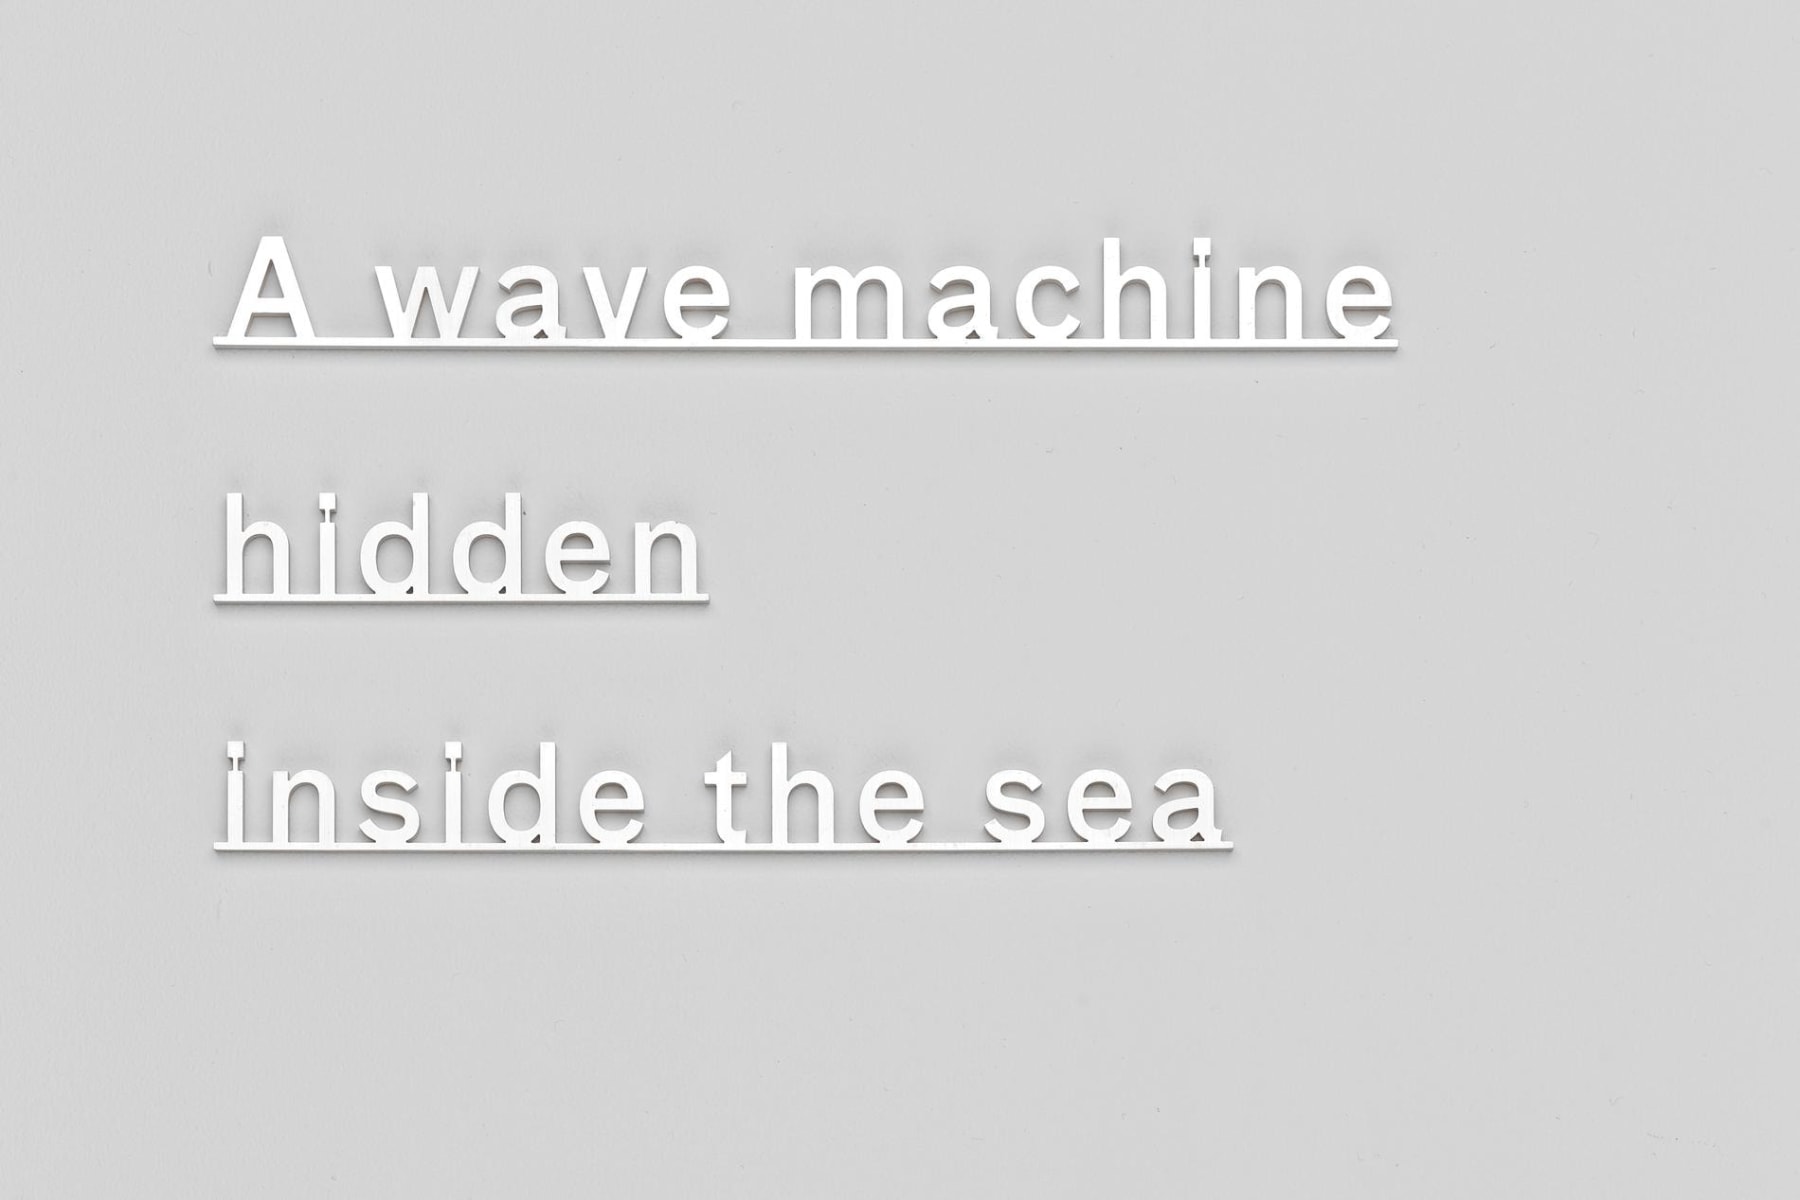 Image of KATIE PATERSON's A wave machine hidden inside the sea, 2015